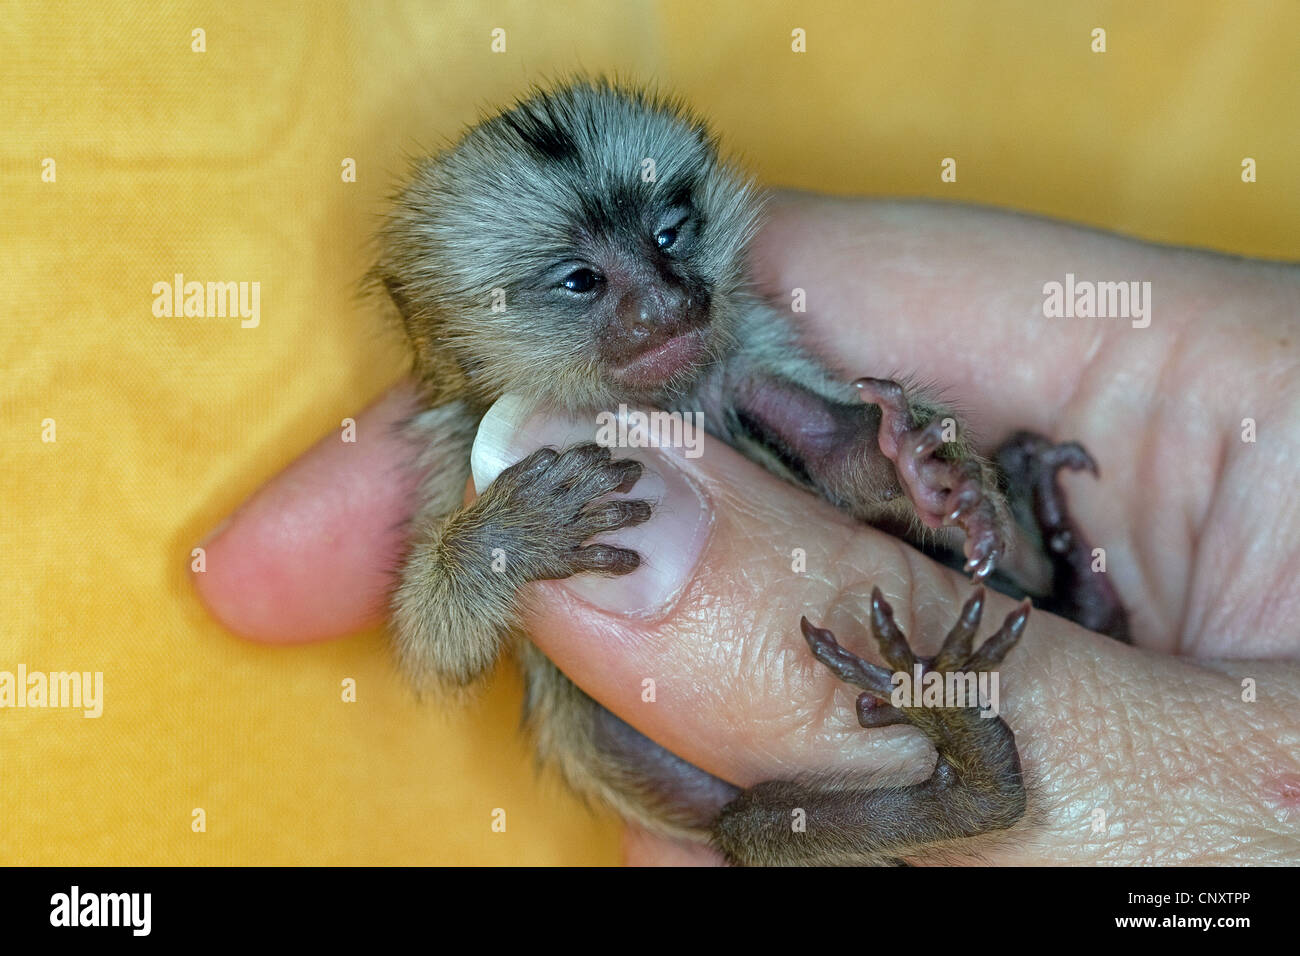 common marmoset (Callithrix jacchus), five-day-old orphan clutching at a finger Stock Photo